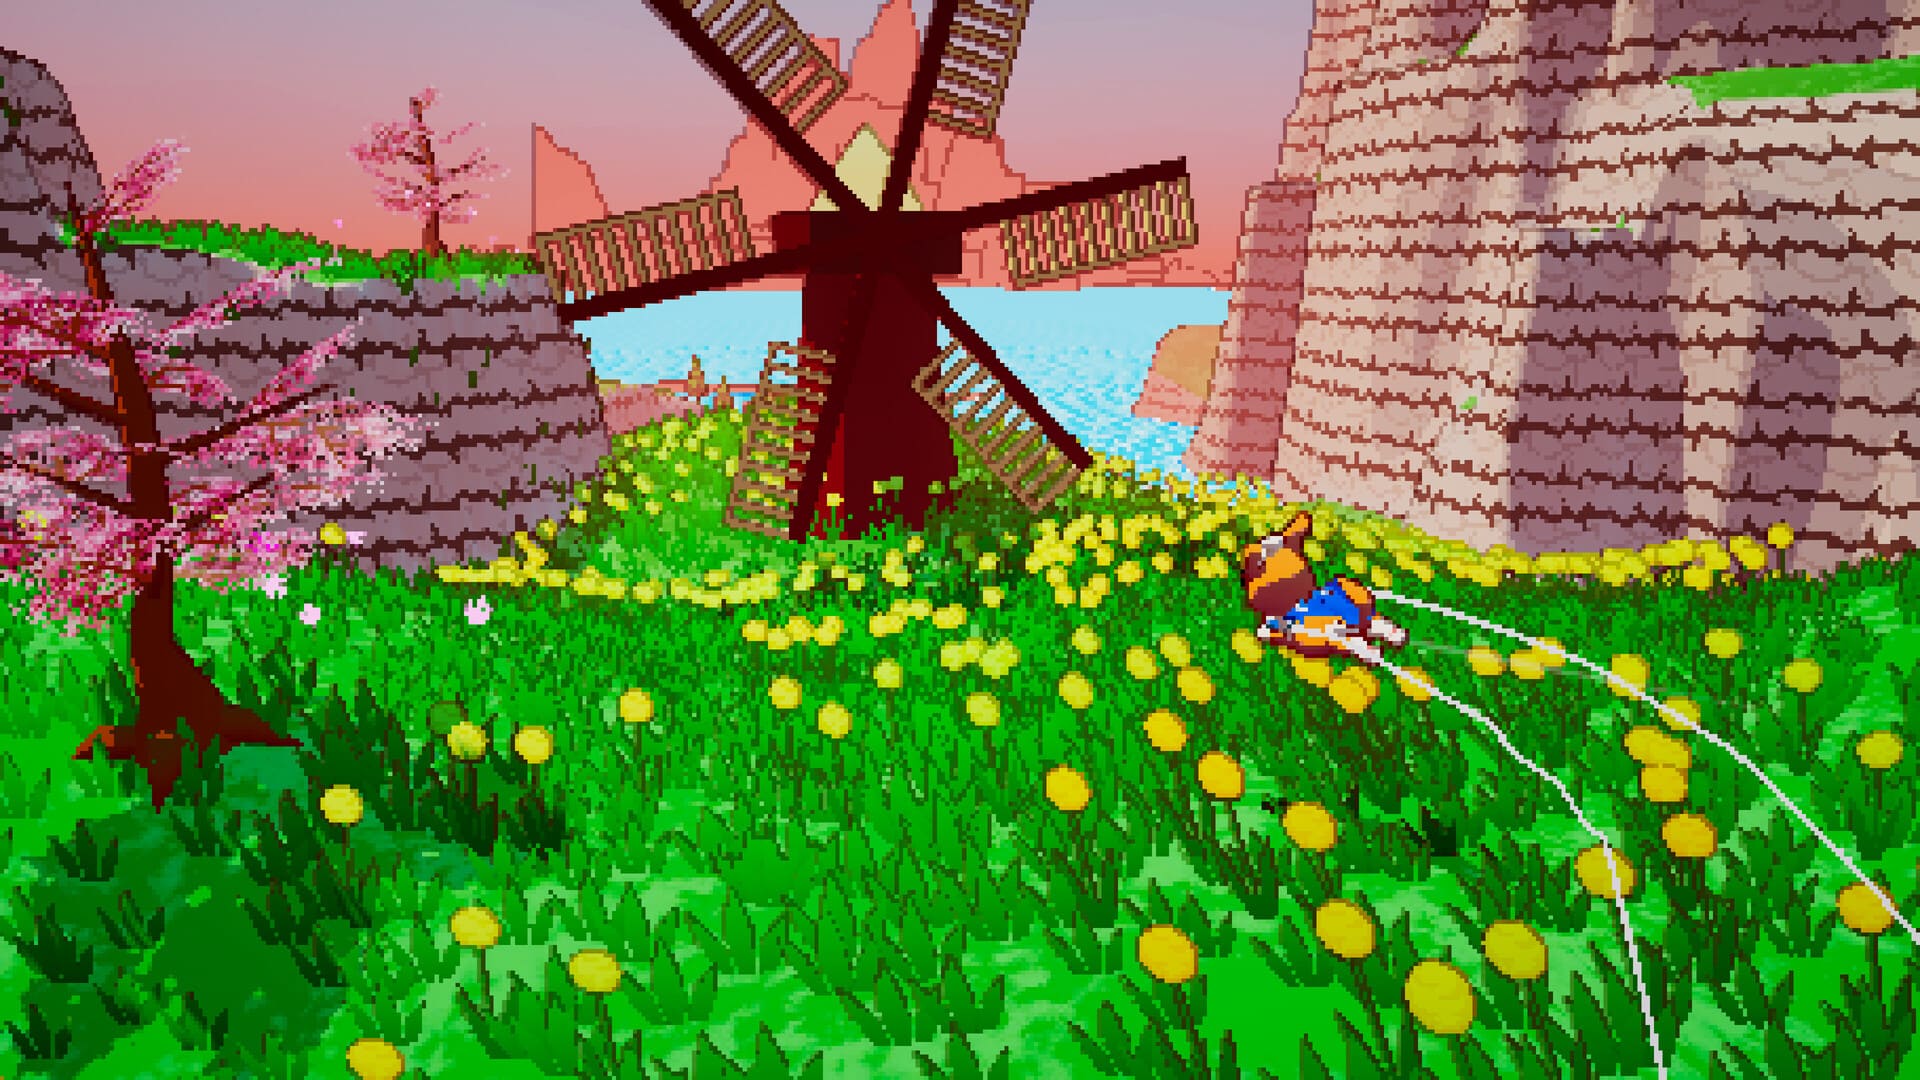 Gameplay from A Corgi's Cozy Hike, featuring the titular protagonist flying in a meadow toward a windmill.